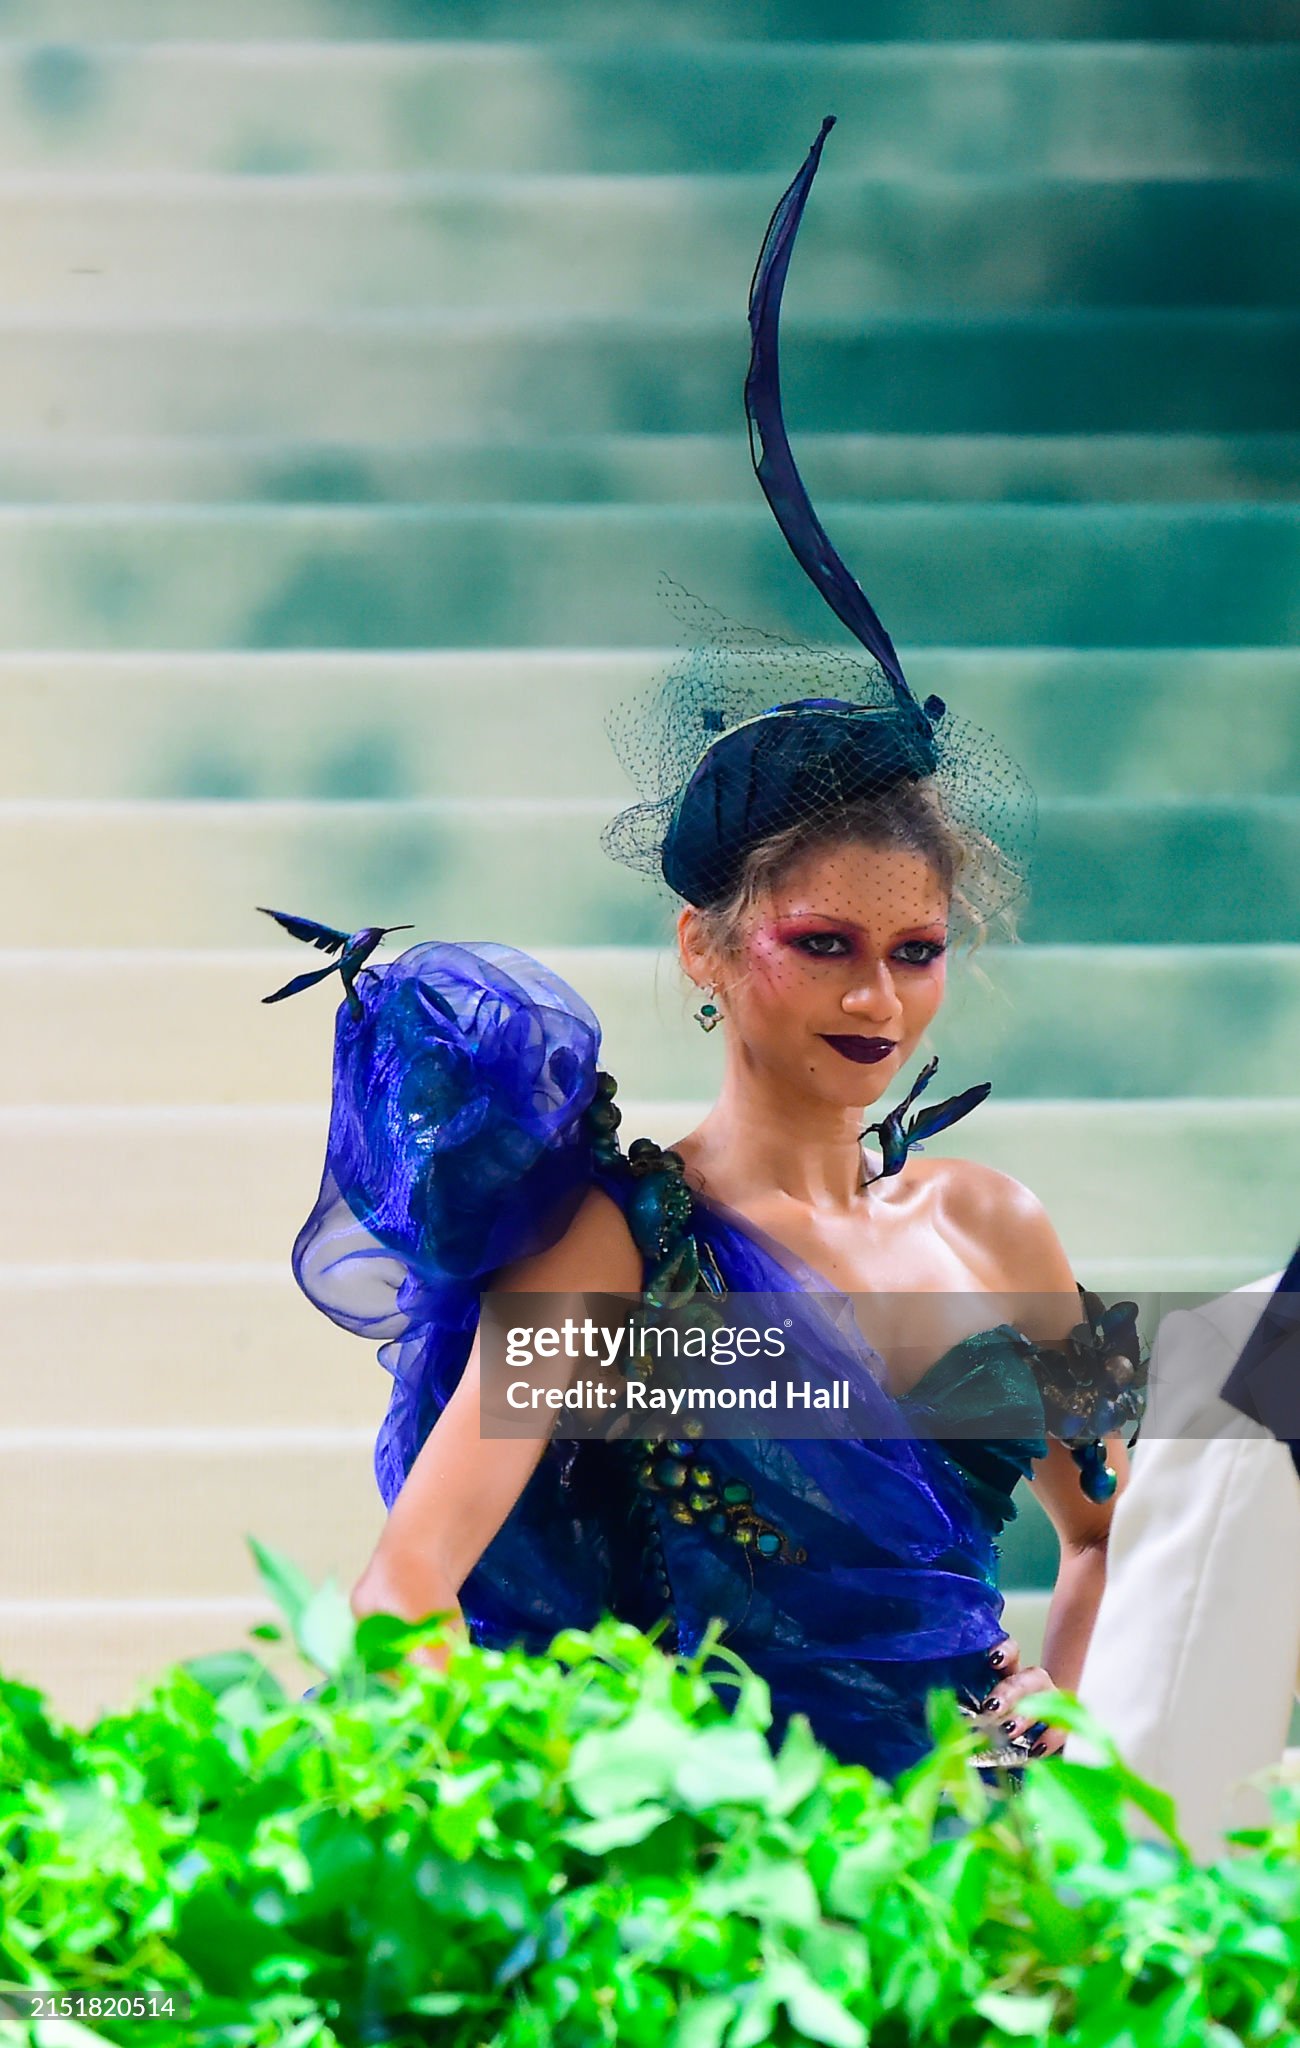 gettyimages-2151820514-2048x2048.jpg